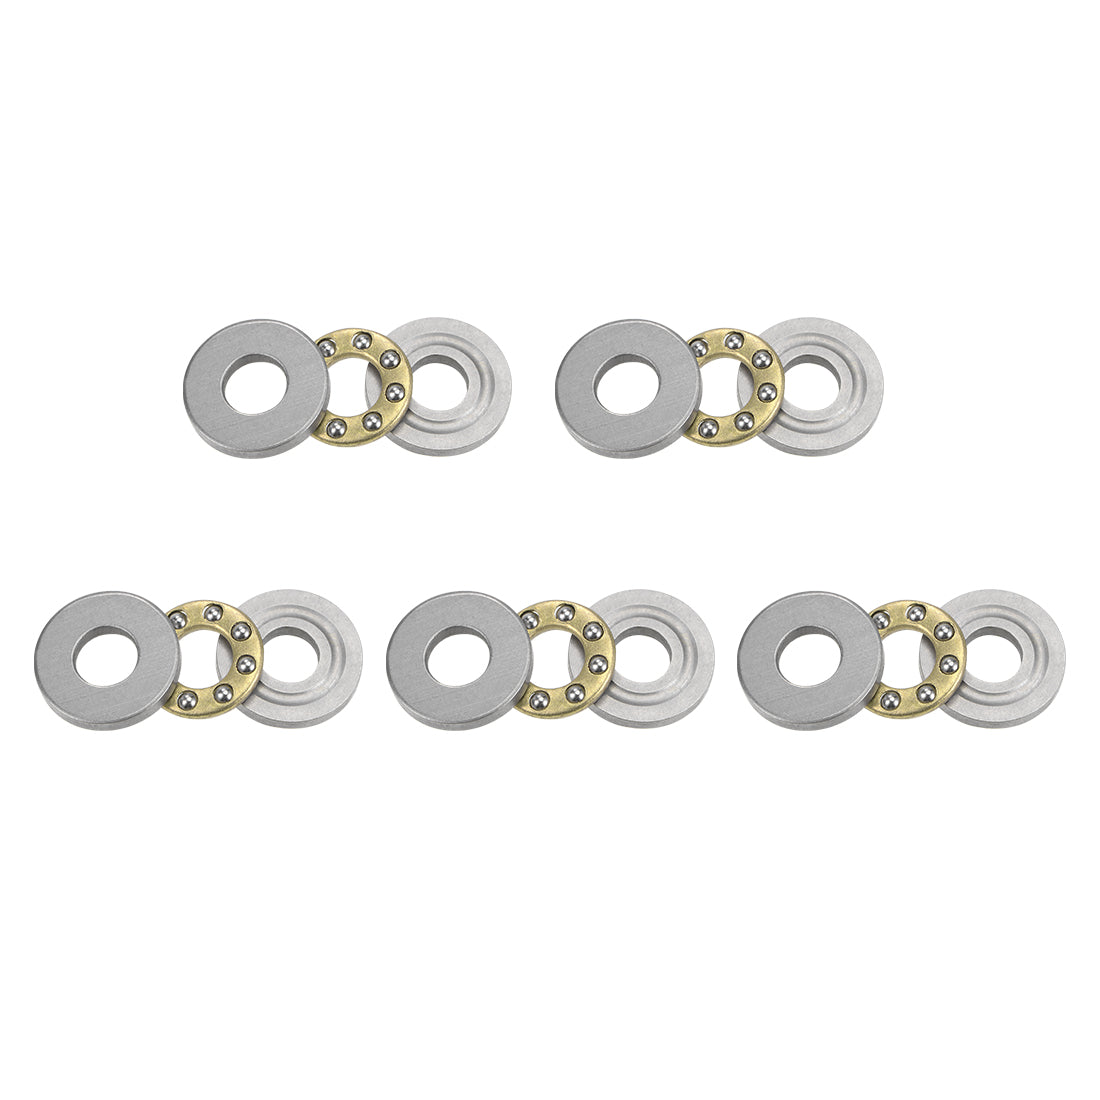 uxcell Uxcell F4-10M Miniature Thrust Ball Bearing 4x10x4mm Chrome Steel with Washer 5Pcs